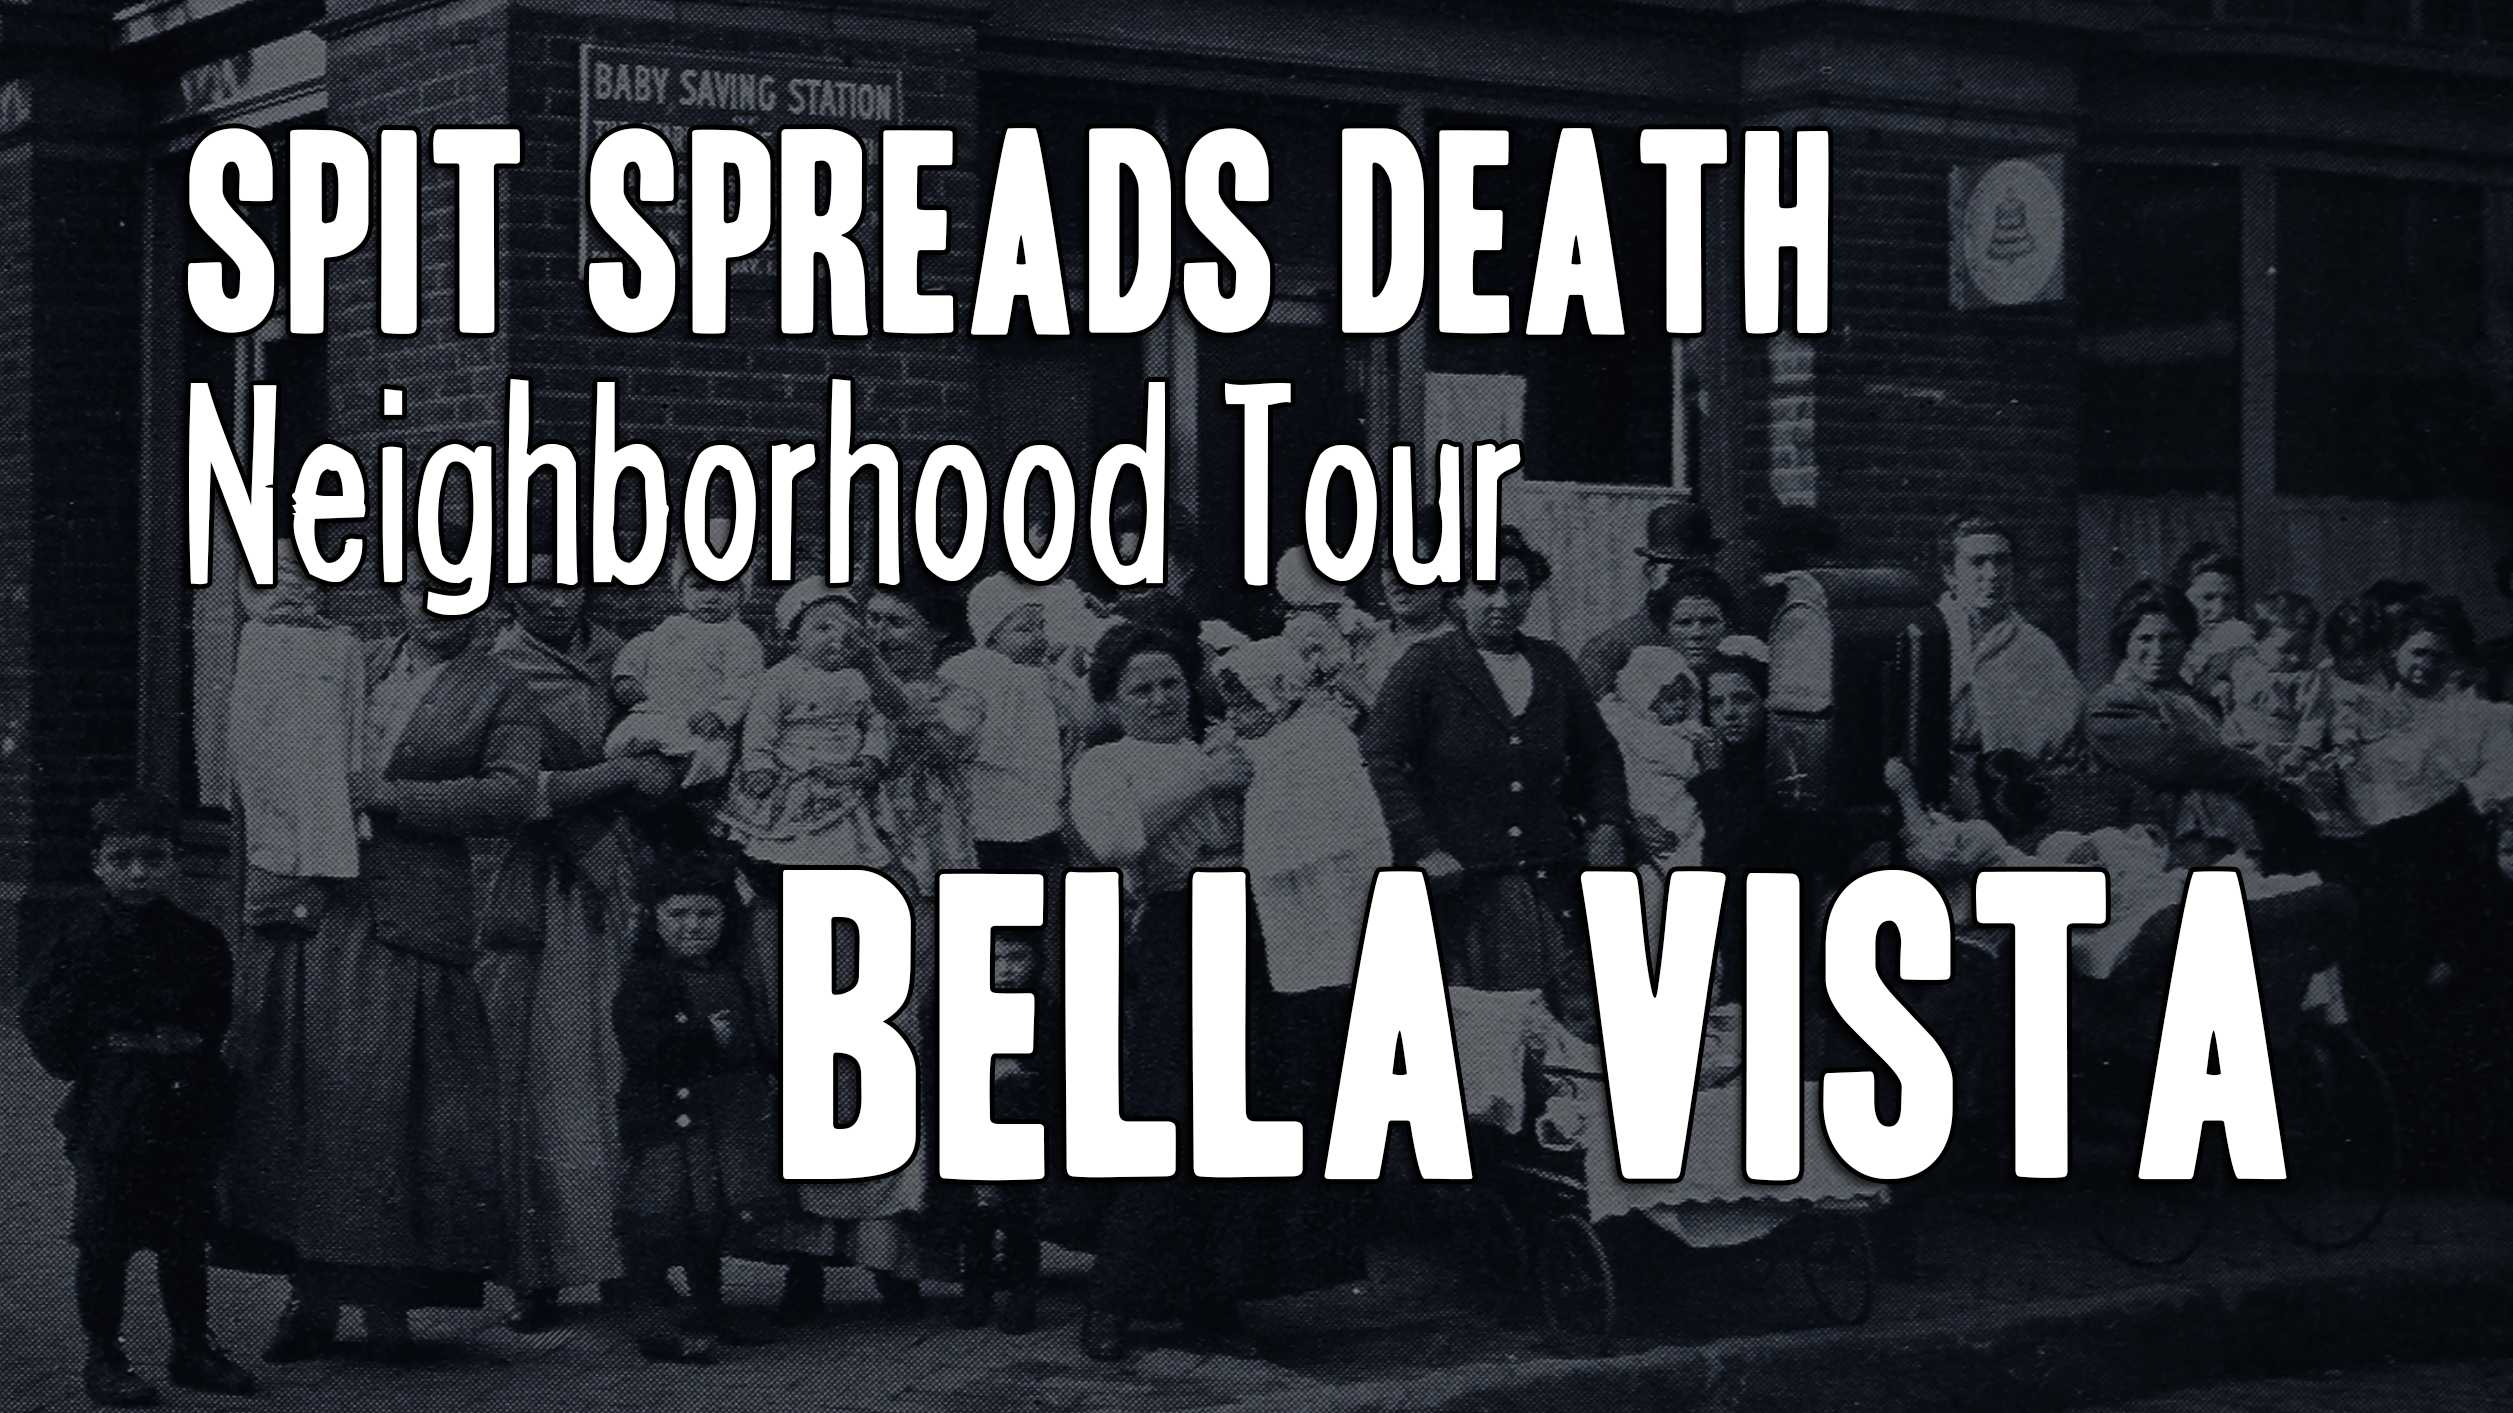 Text over an old photograph of a crowd of people reading: "Spit Spreads Death Neighborhood Tour: Bella Vista"